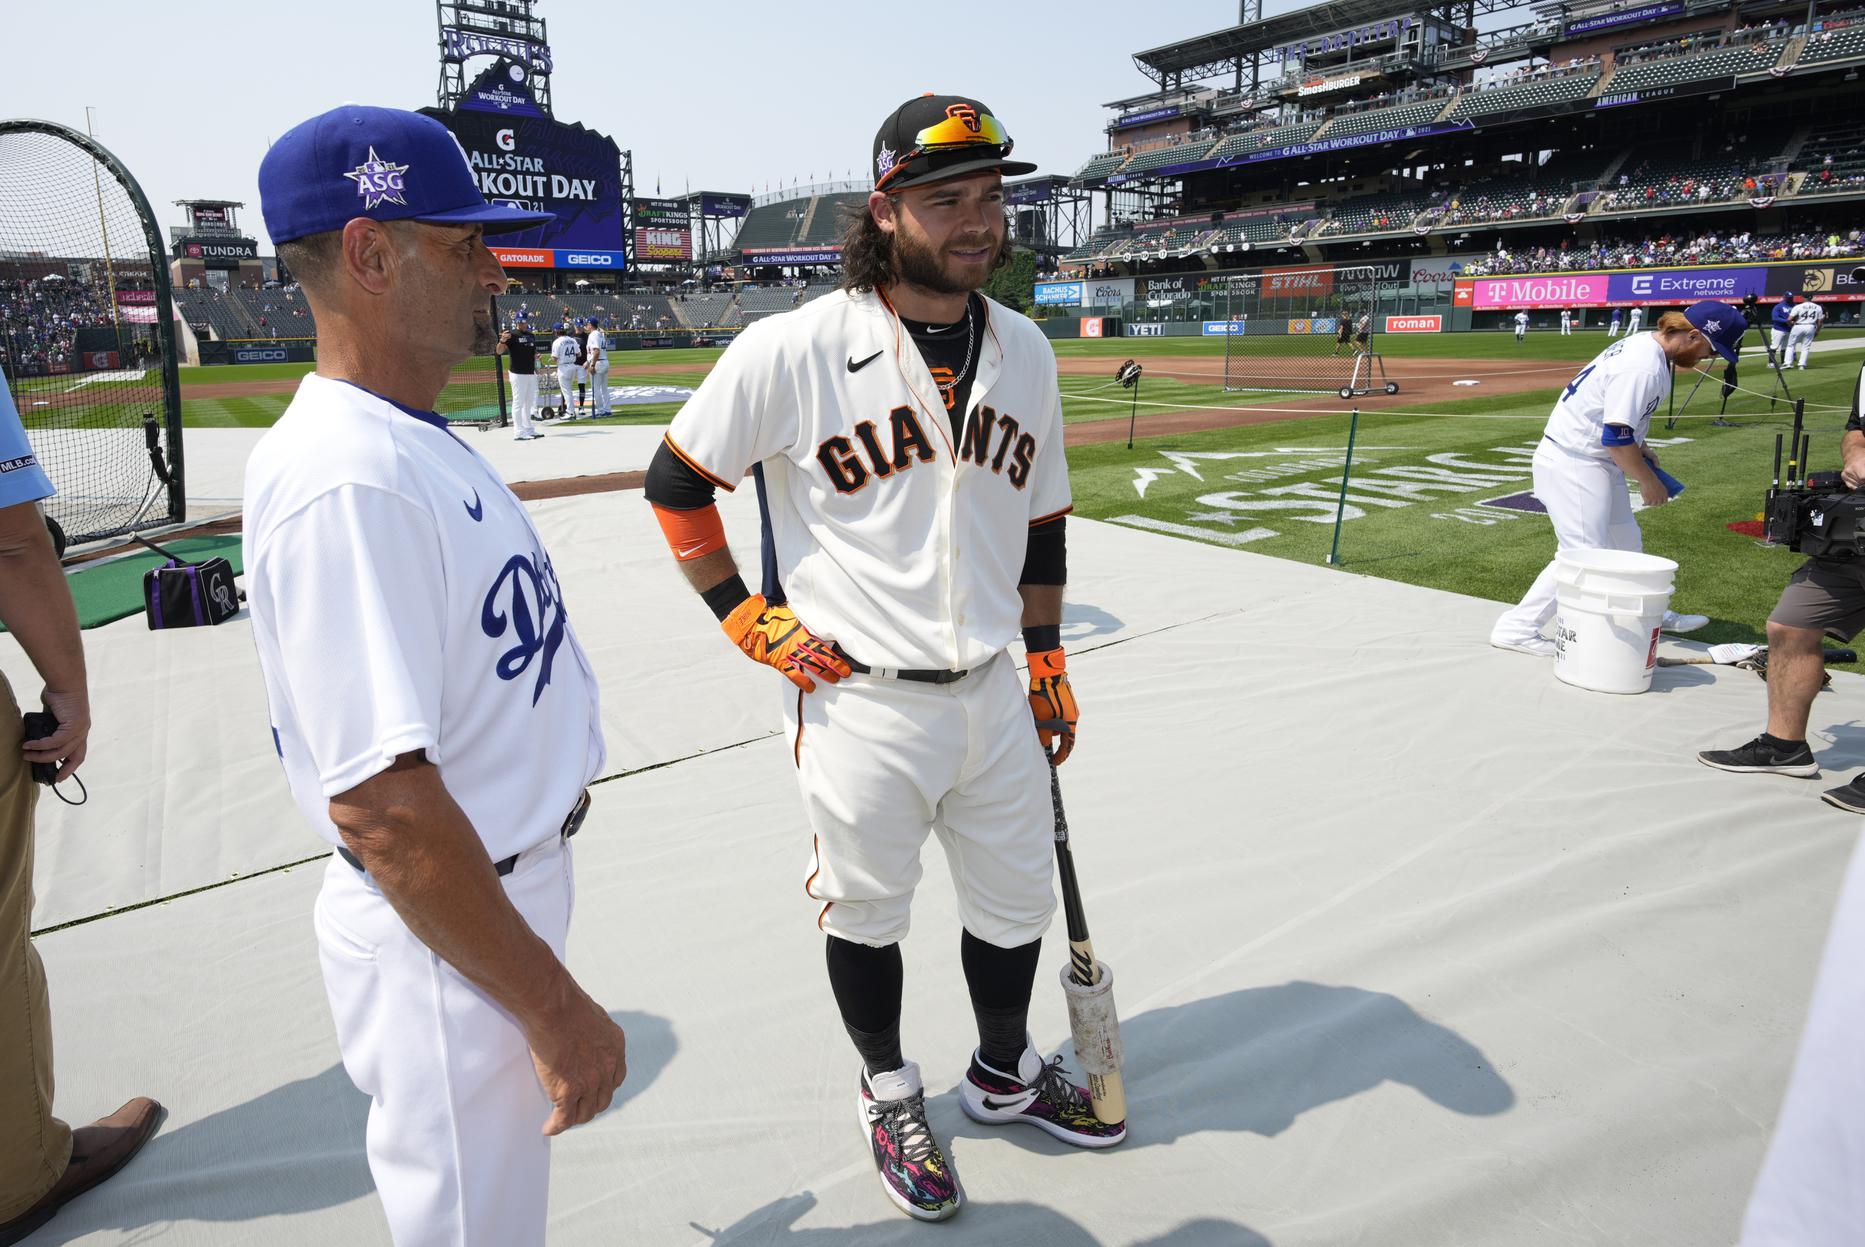 Brandon Crawford is developing into an all-star shortstop 